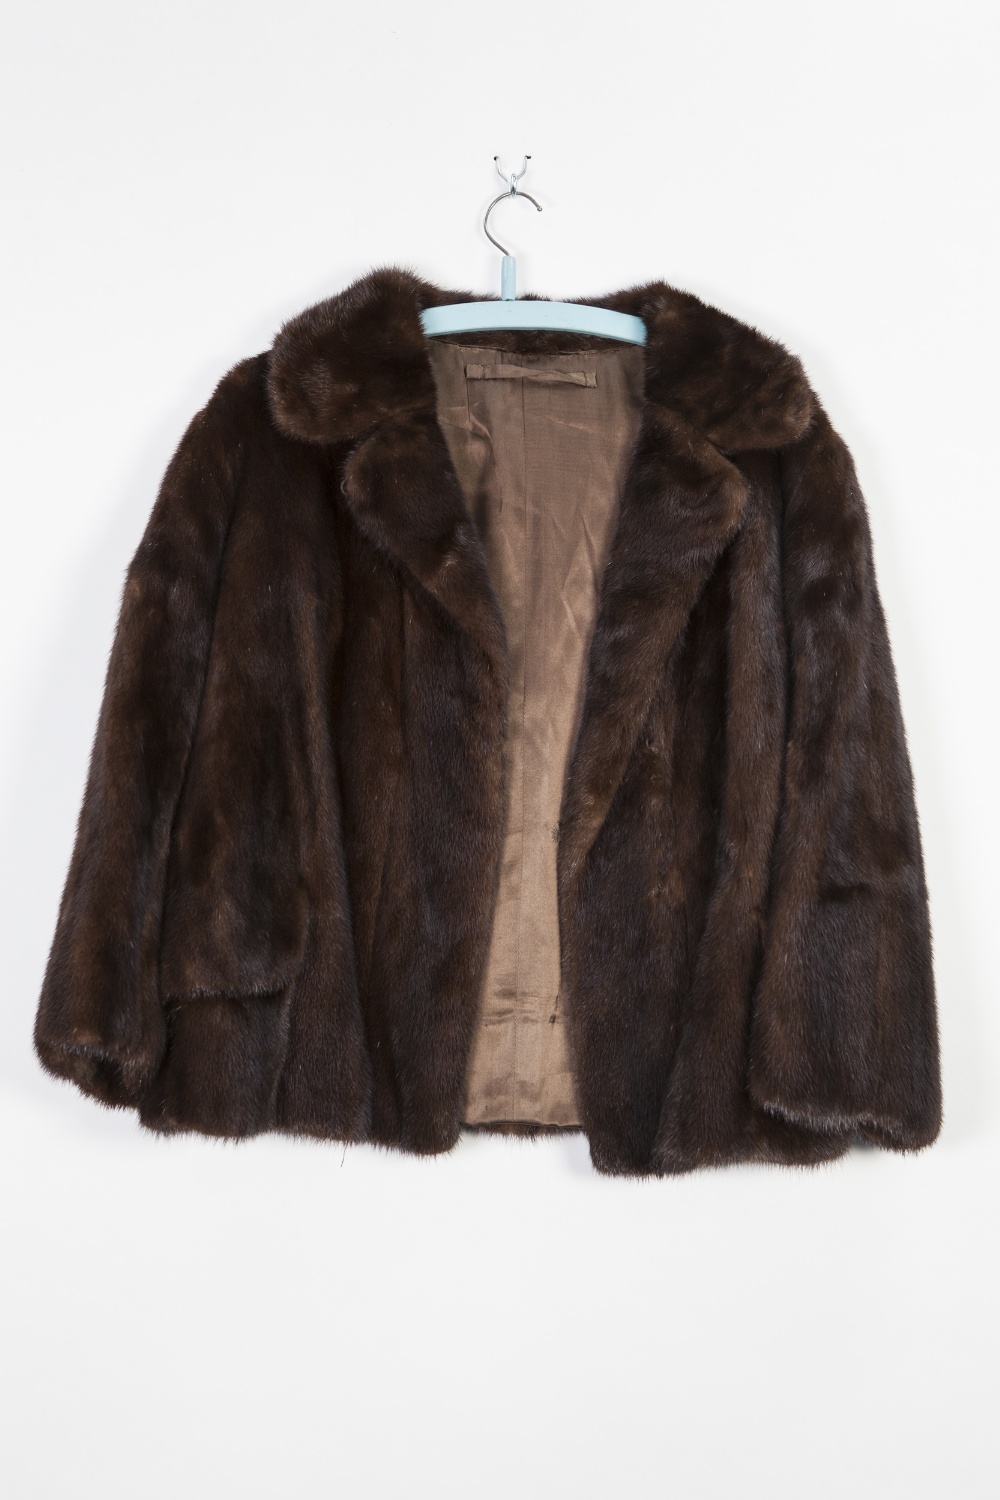 LADY'S DARK BROWN MINK SHORT EVENING JACKET, with revered collar and hook fastening front, approx